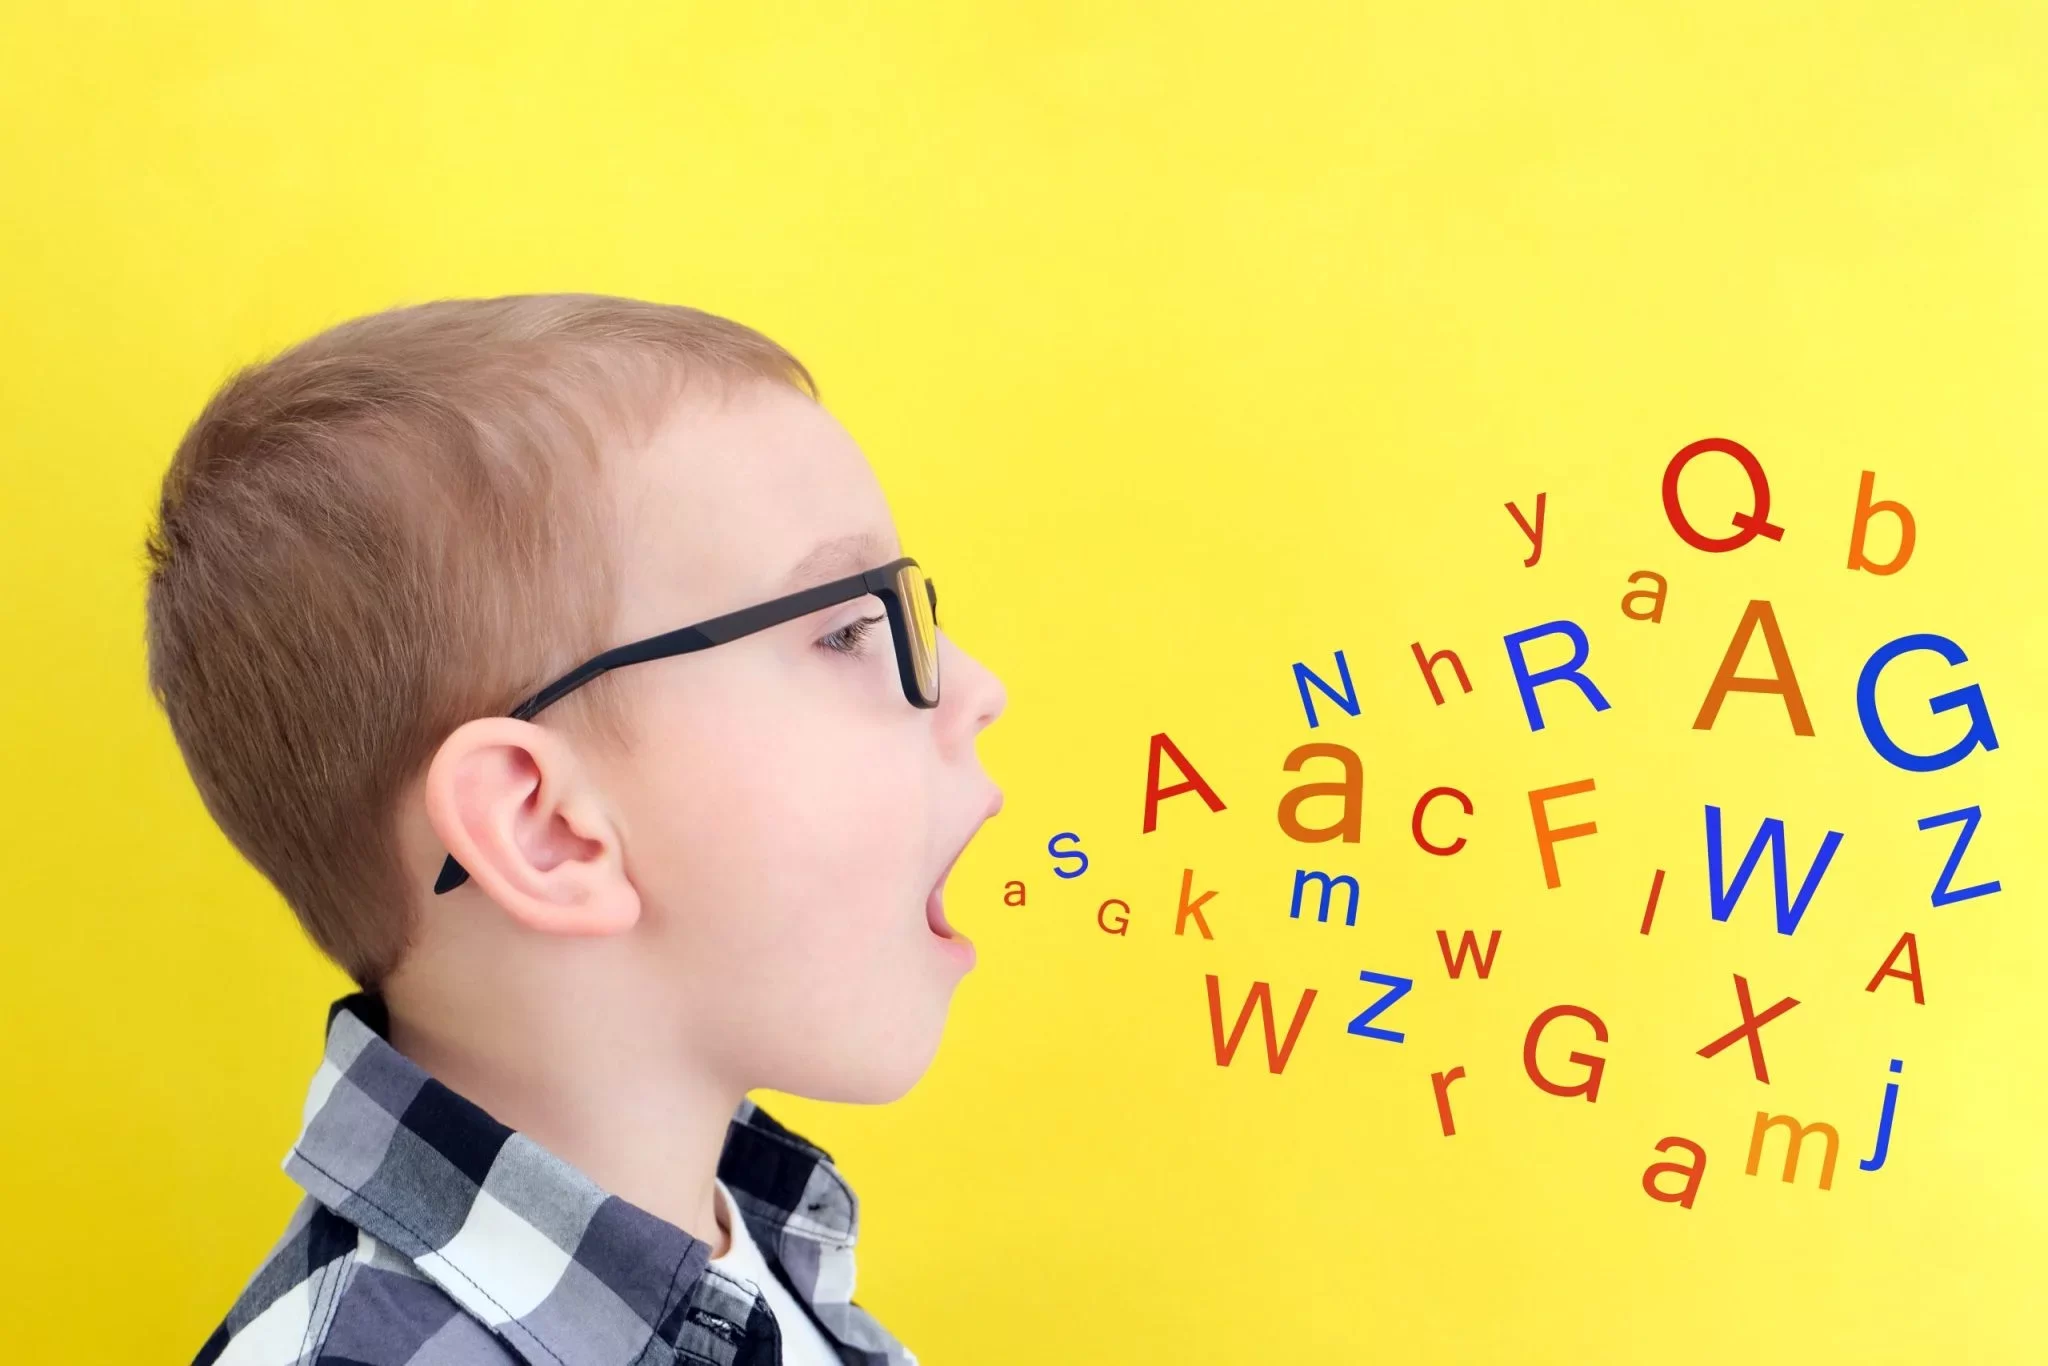 speech therapy toddler boy says open mouth with letters classes with speech therapist boy isolated yellow background scaled